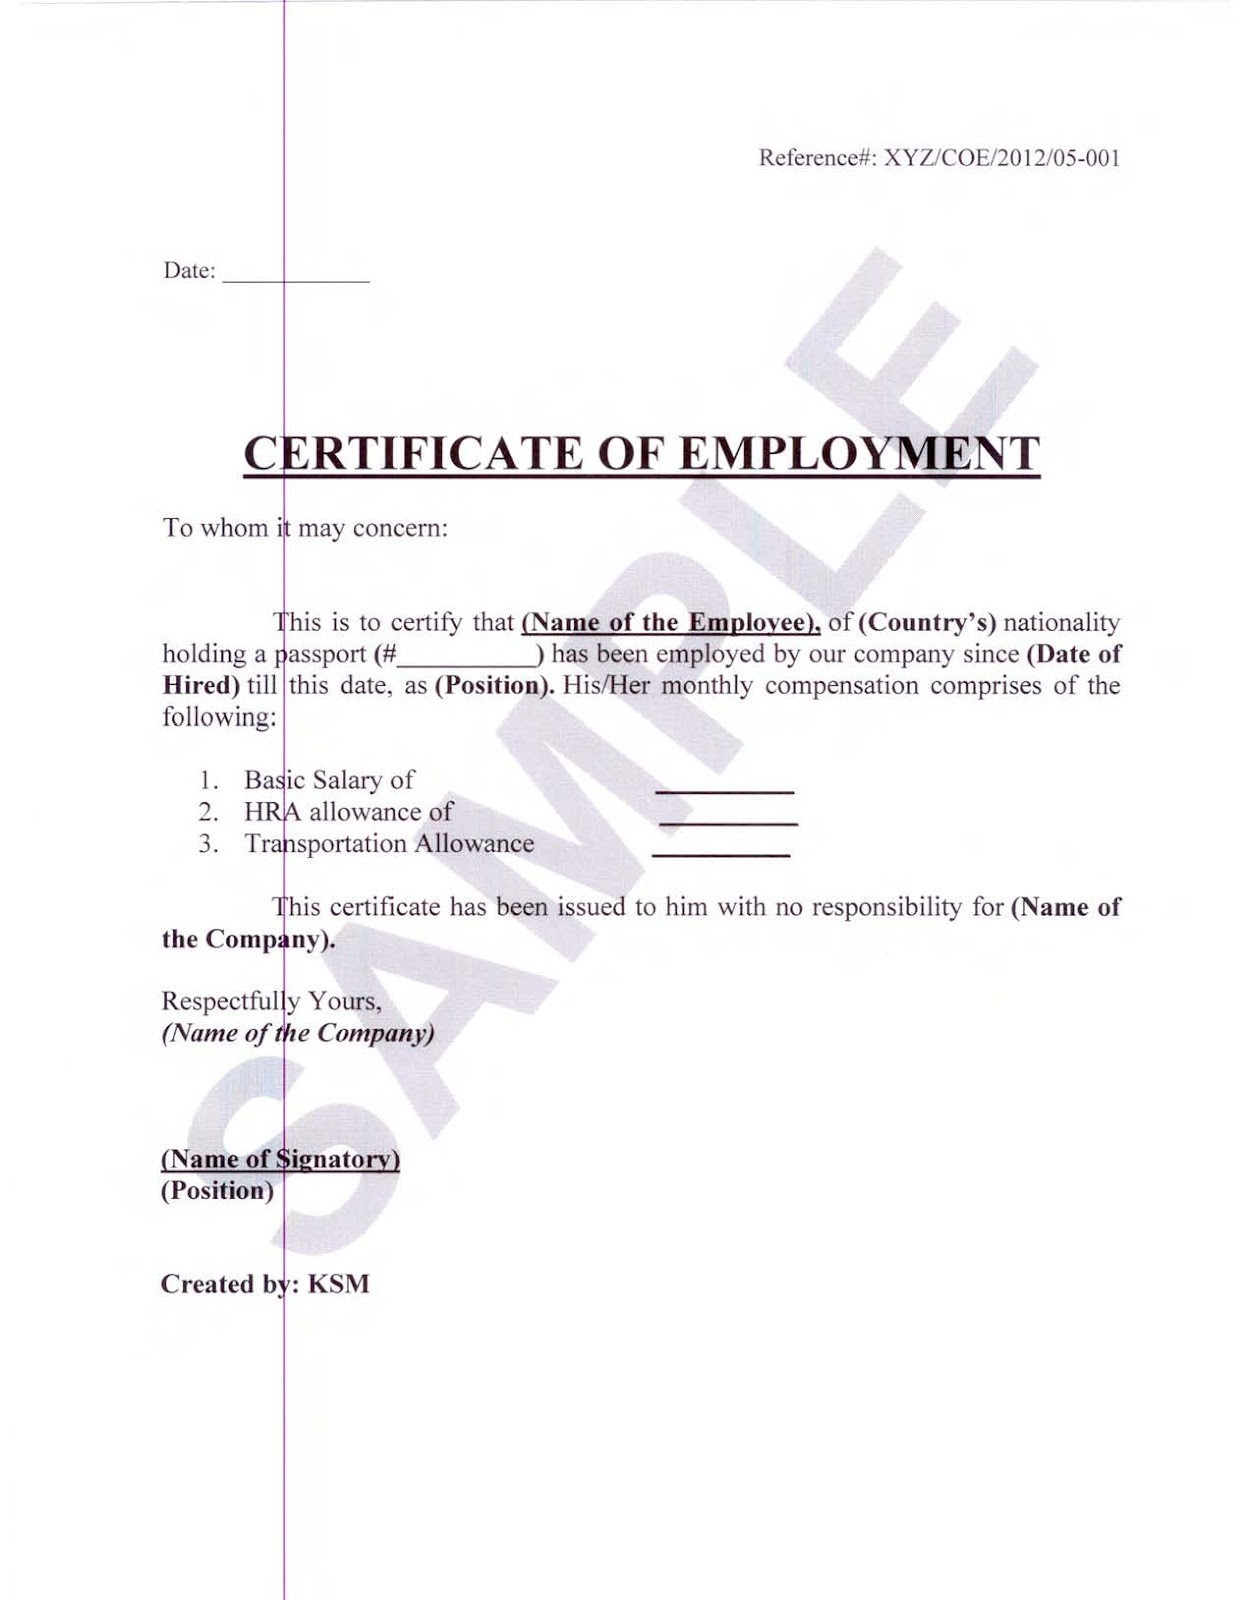 Proof Of Employment and Salary Letter Template - Sample Certificate Employment with Salary Indicated Best